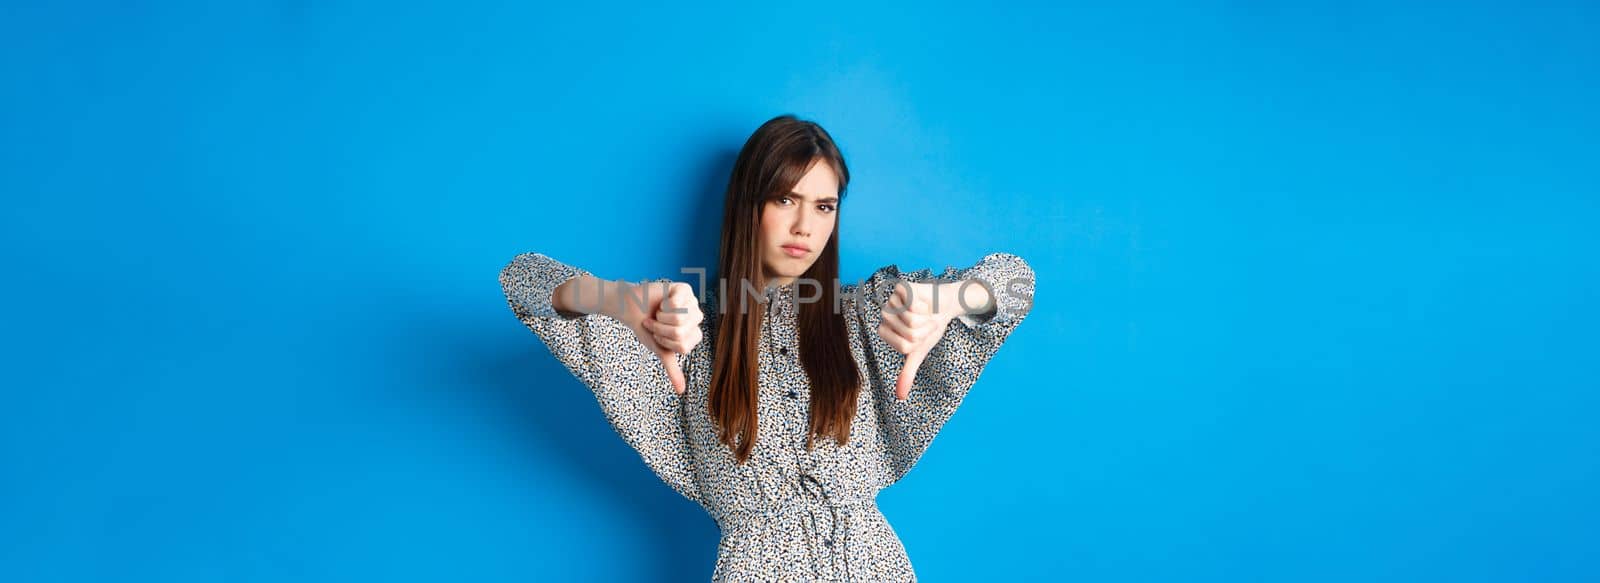 Negative emotion. Disappointed frowning woman with long hair and dress, showing thumbs down and grimacing with dislike, express aversion, standing on blue background.